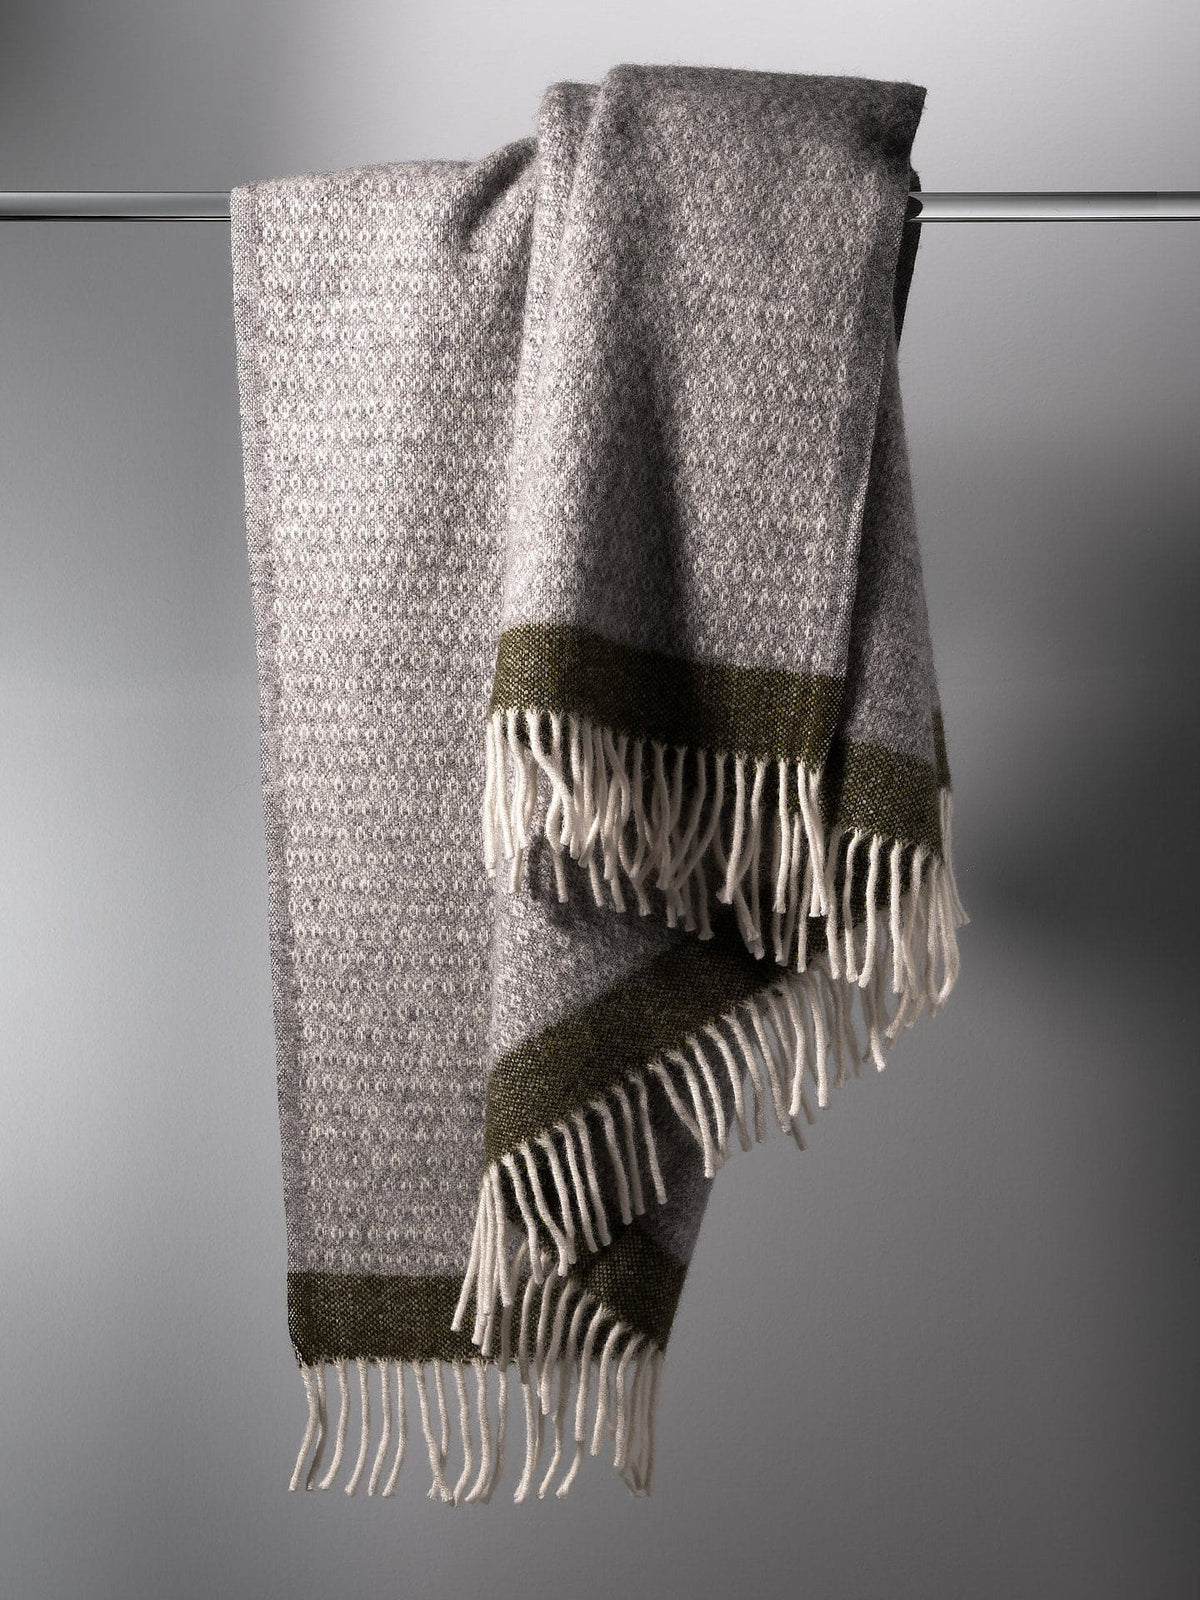 A Hampus Wool Throw – Grey Green with fringes hanging on a hanger. (Klippan)